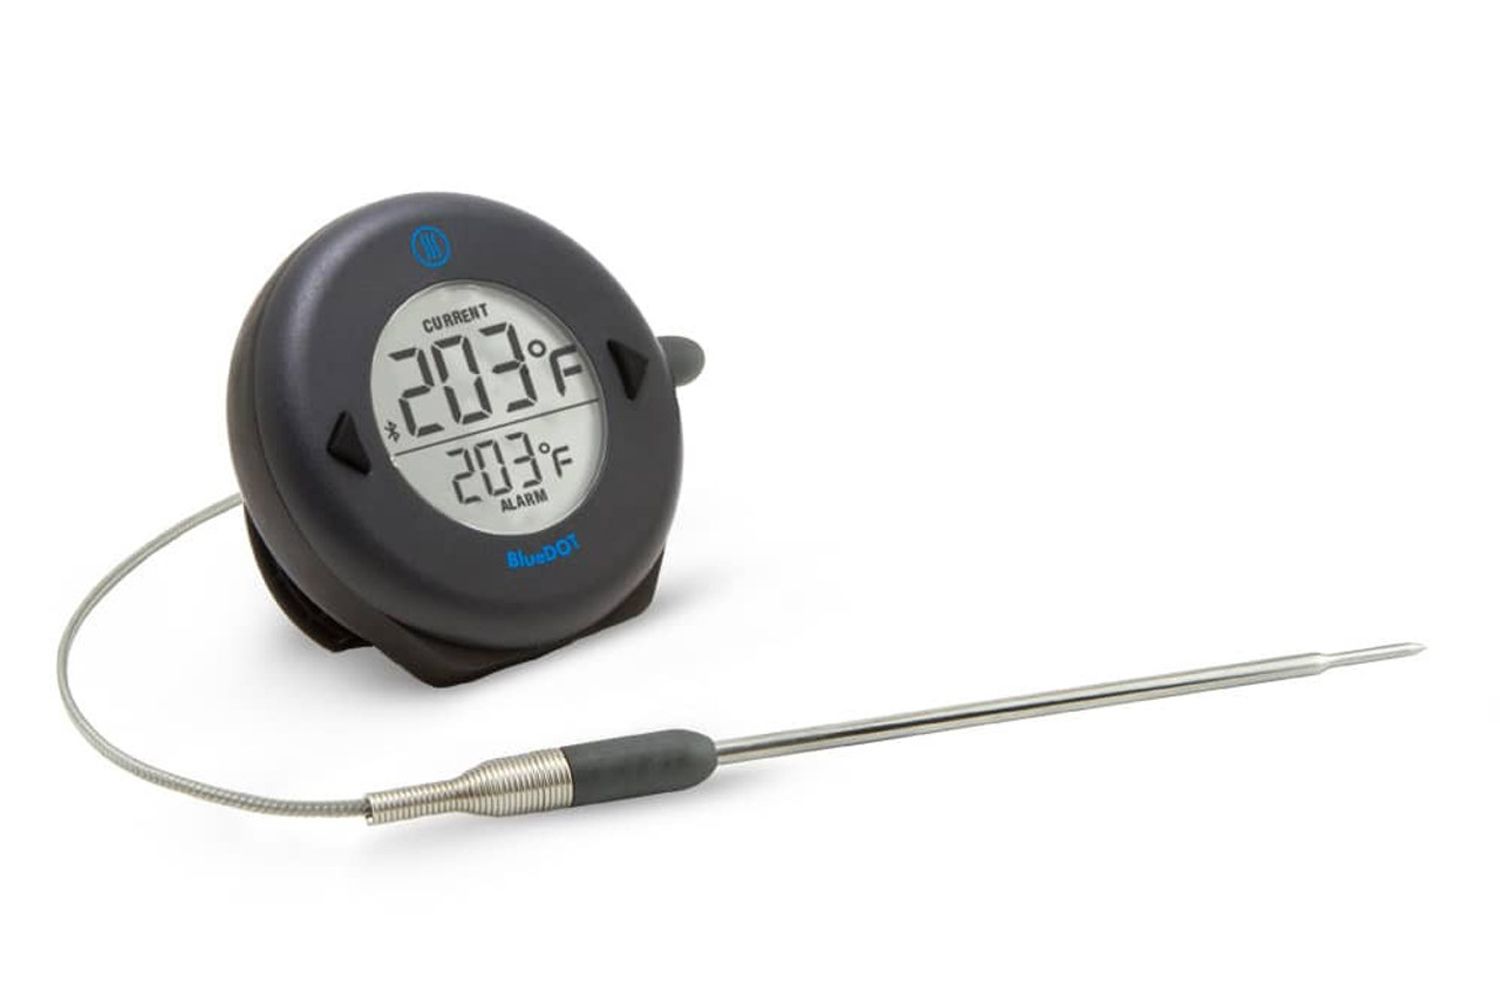 ThermoWorks BlueDOT Alarm Thermometer with Bluetooth Wireless Technology